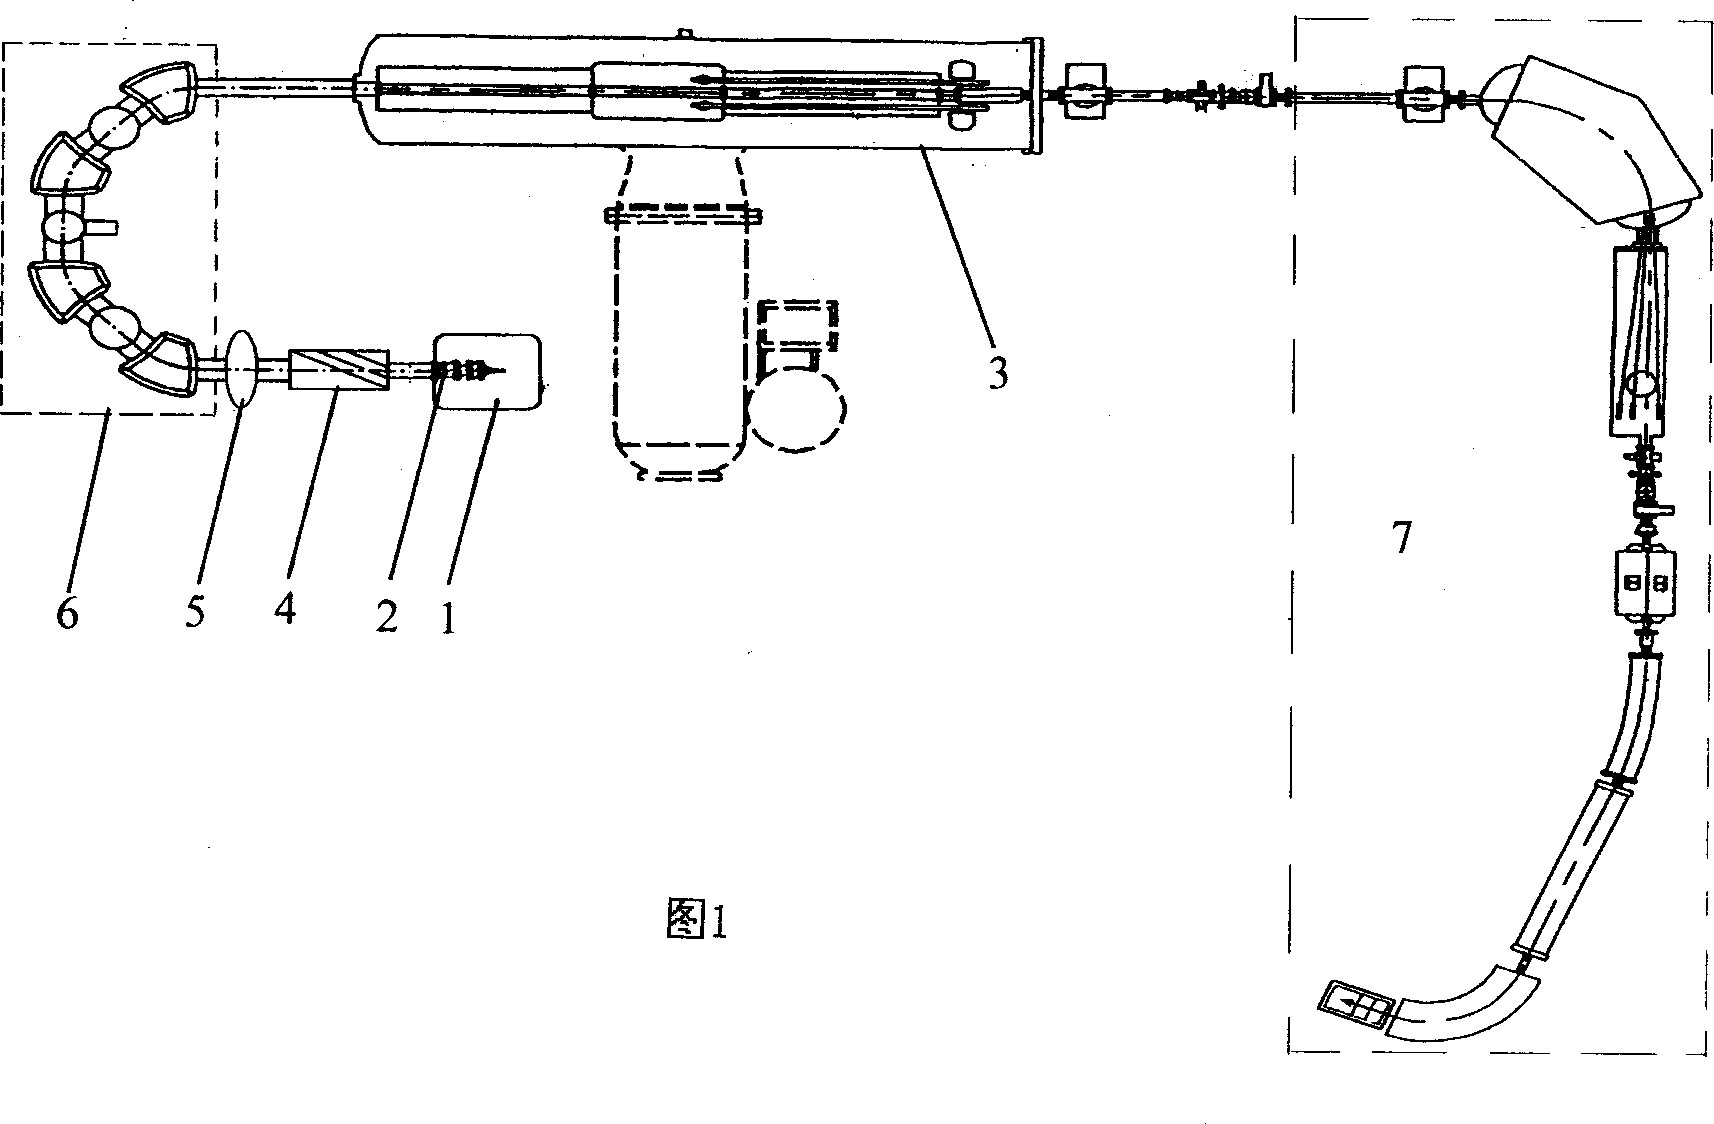 Double-injected tandom accelerator mass spectrometer